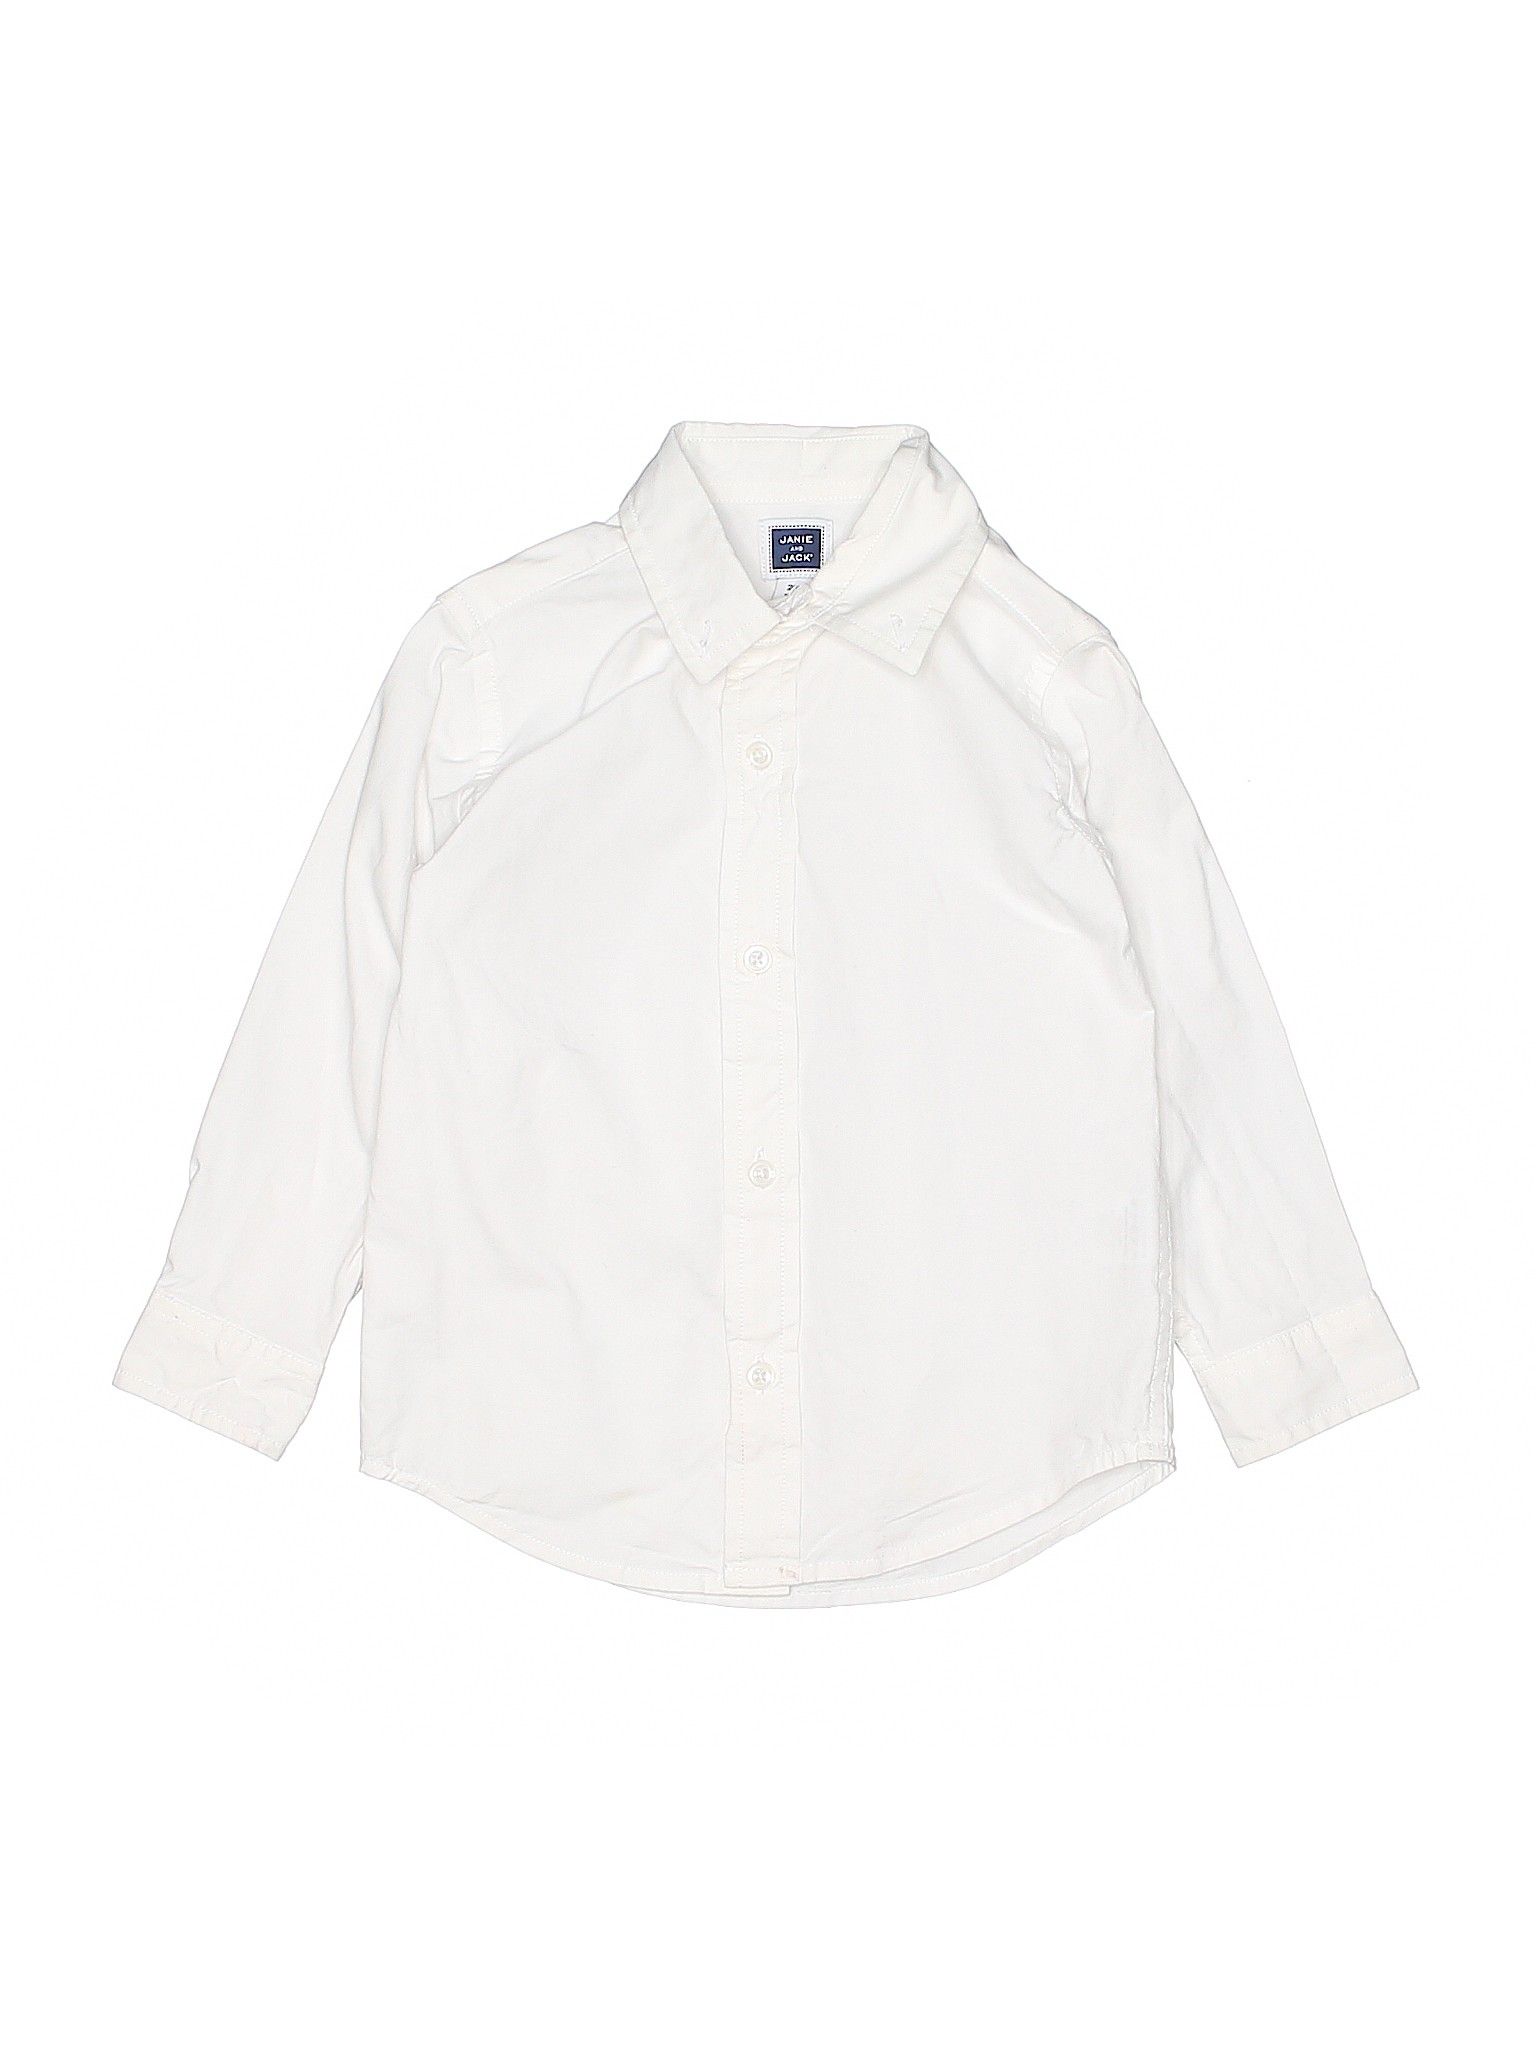 Janie and Jack Long Sleeve Button Down Shirt Size 2T: White Boys Tops - 43873803 | thredUP